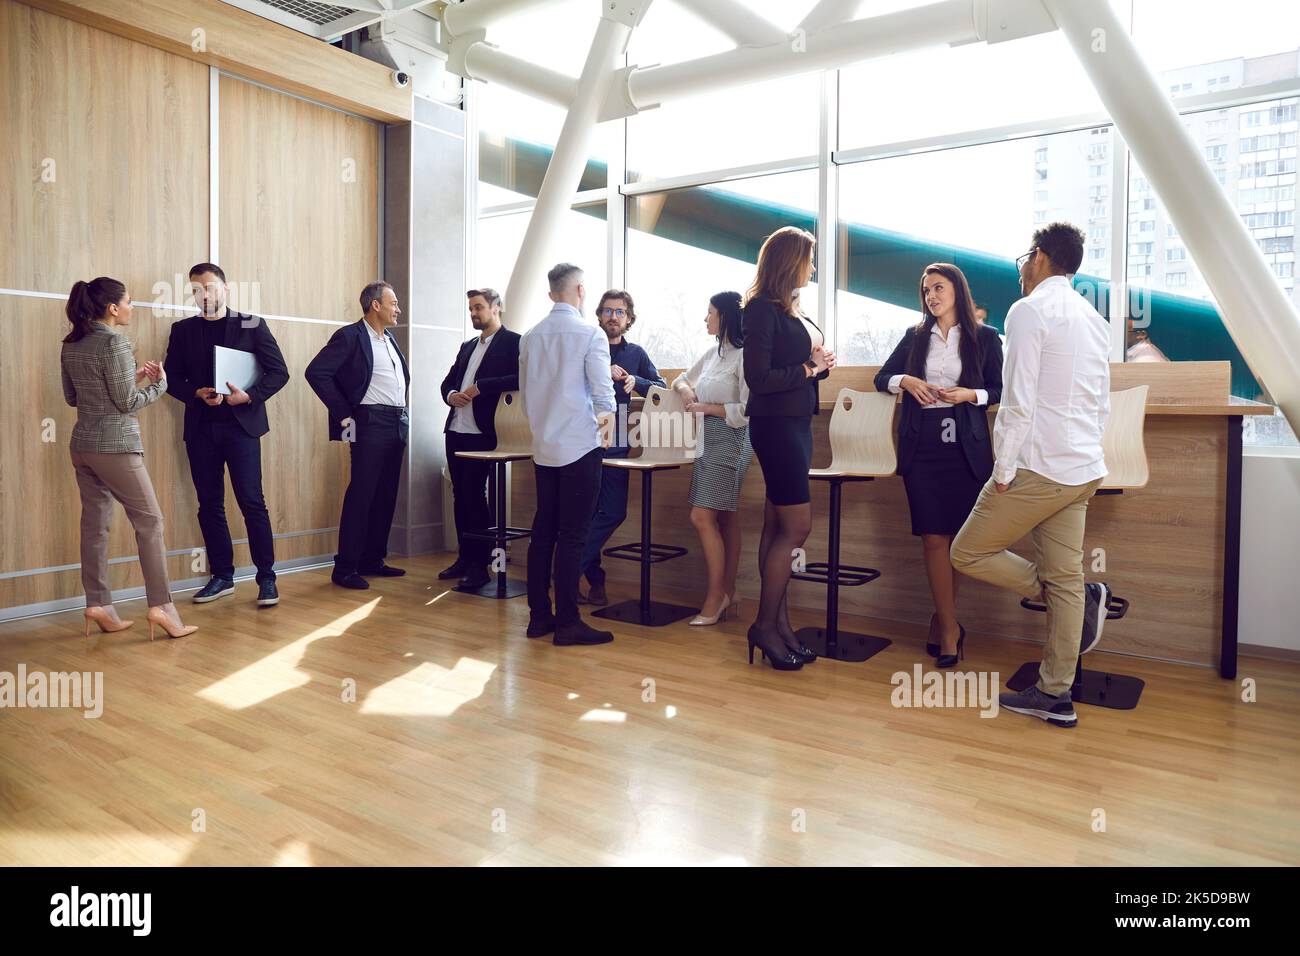 Group of people standing and talking in a modern office after a business event or a work meeting Stock Photo